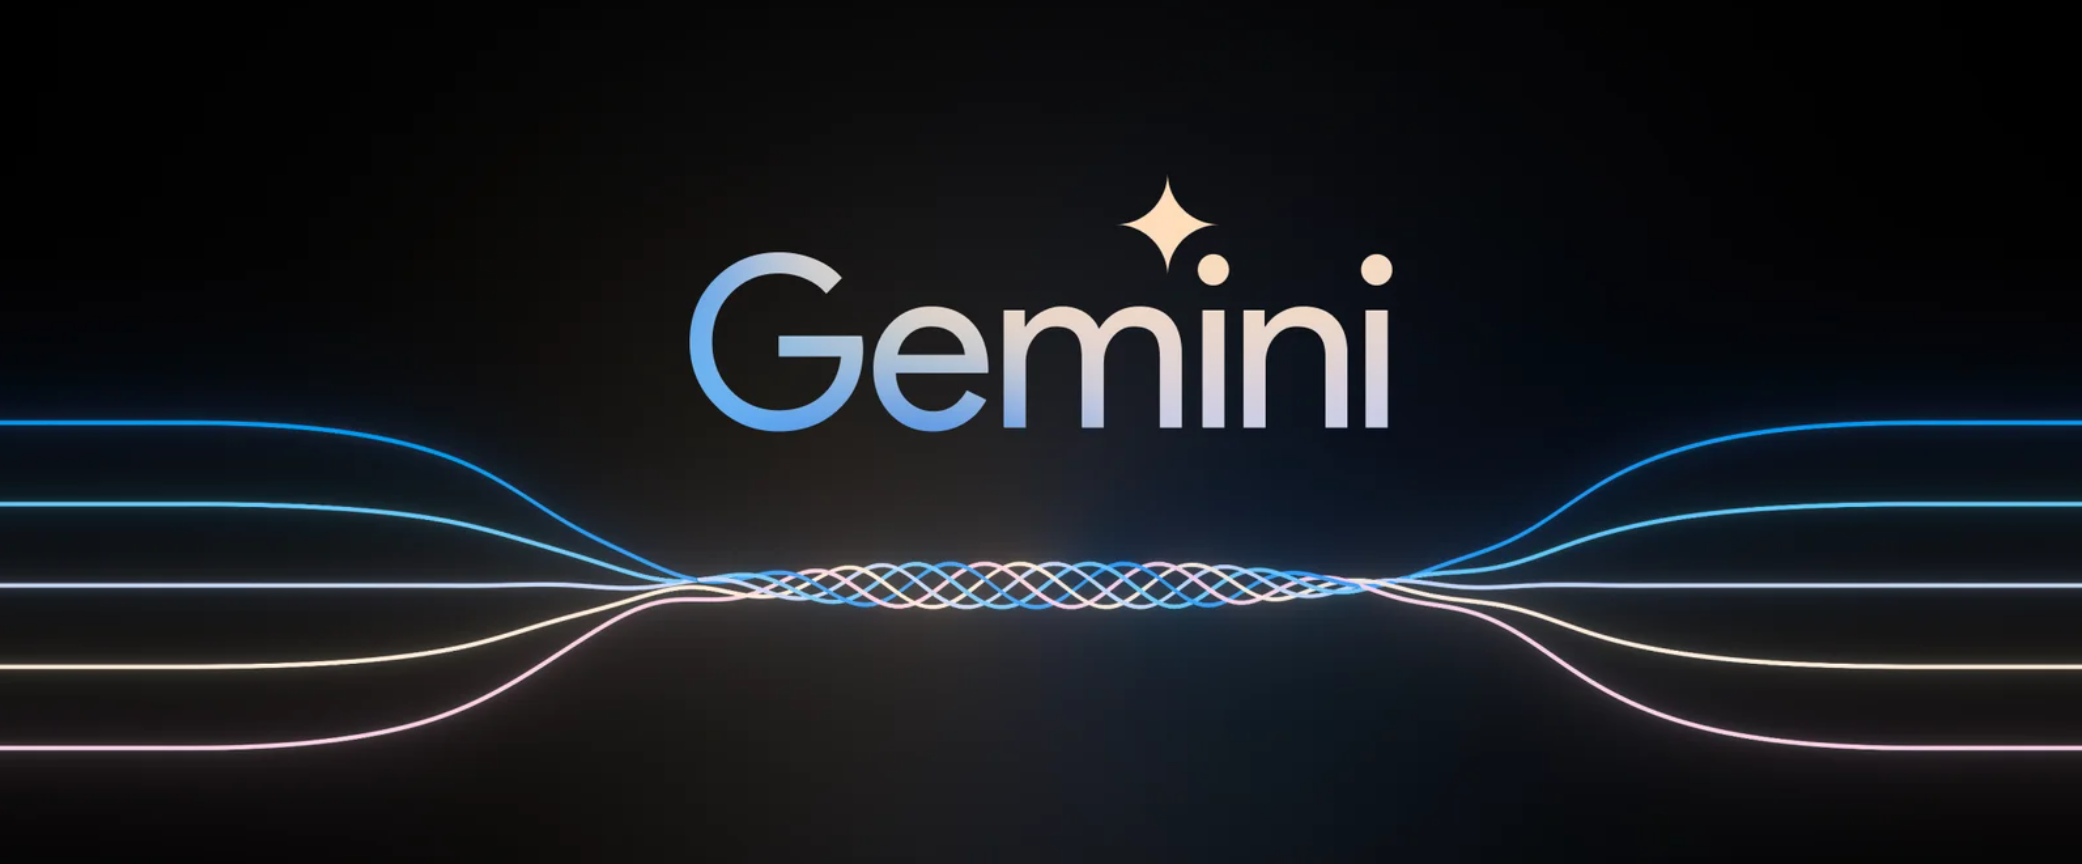 Google introduces Gemini, its largest and most capable AI model